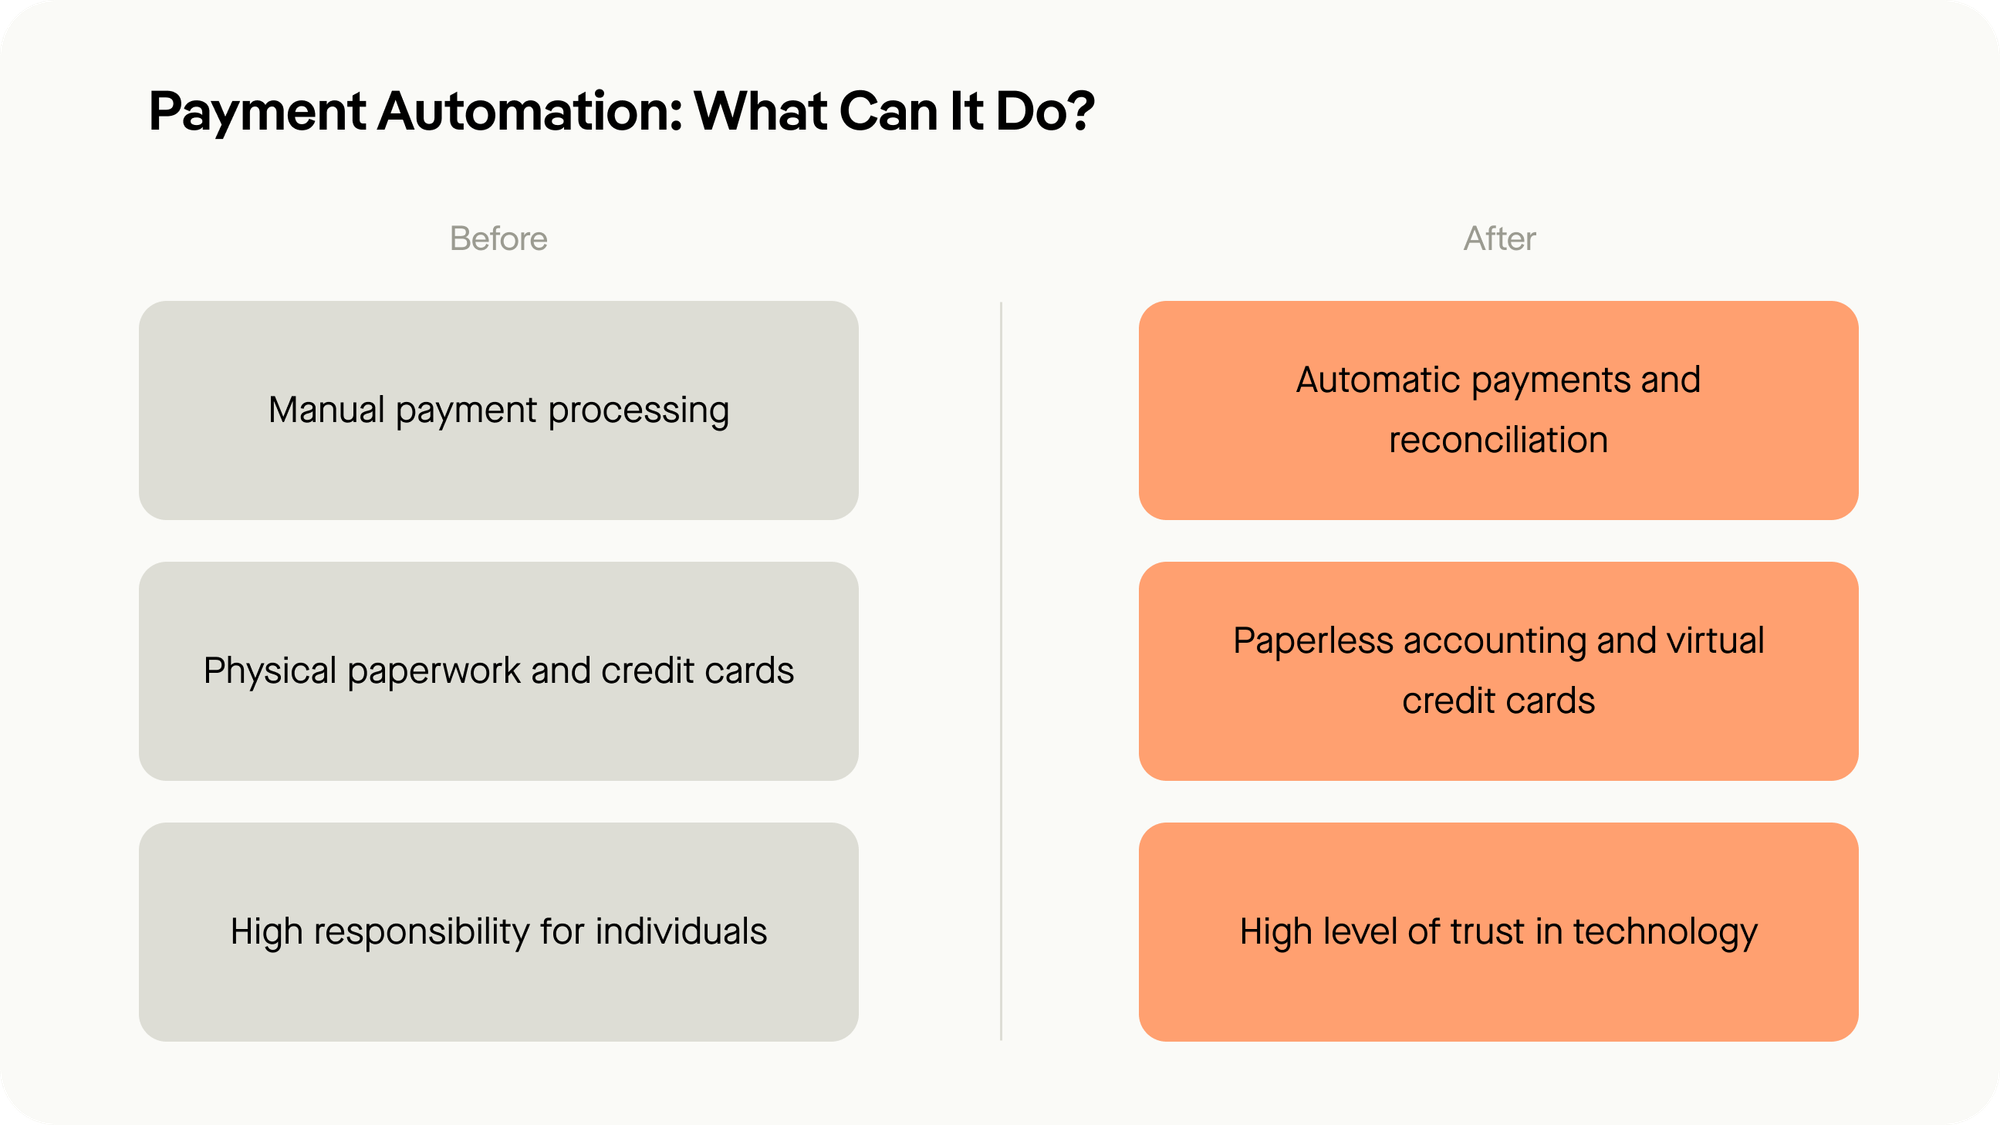 Opportunities for payment automation